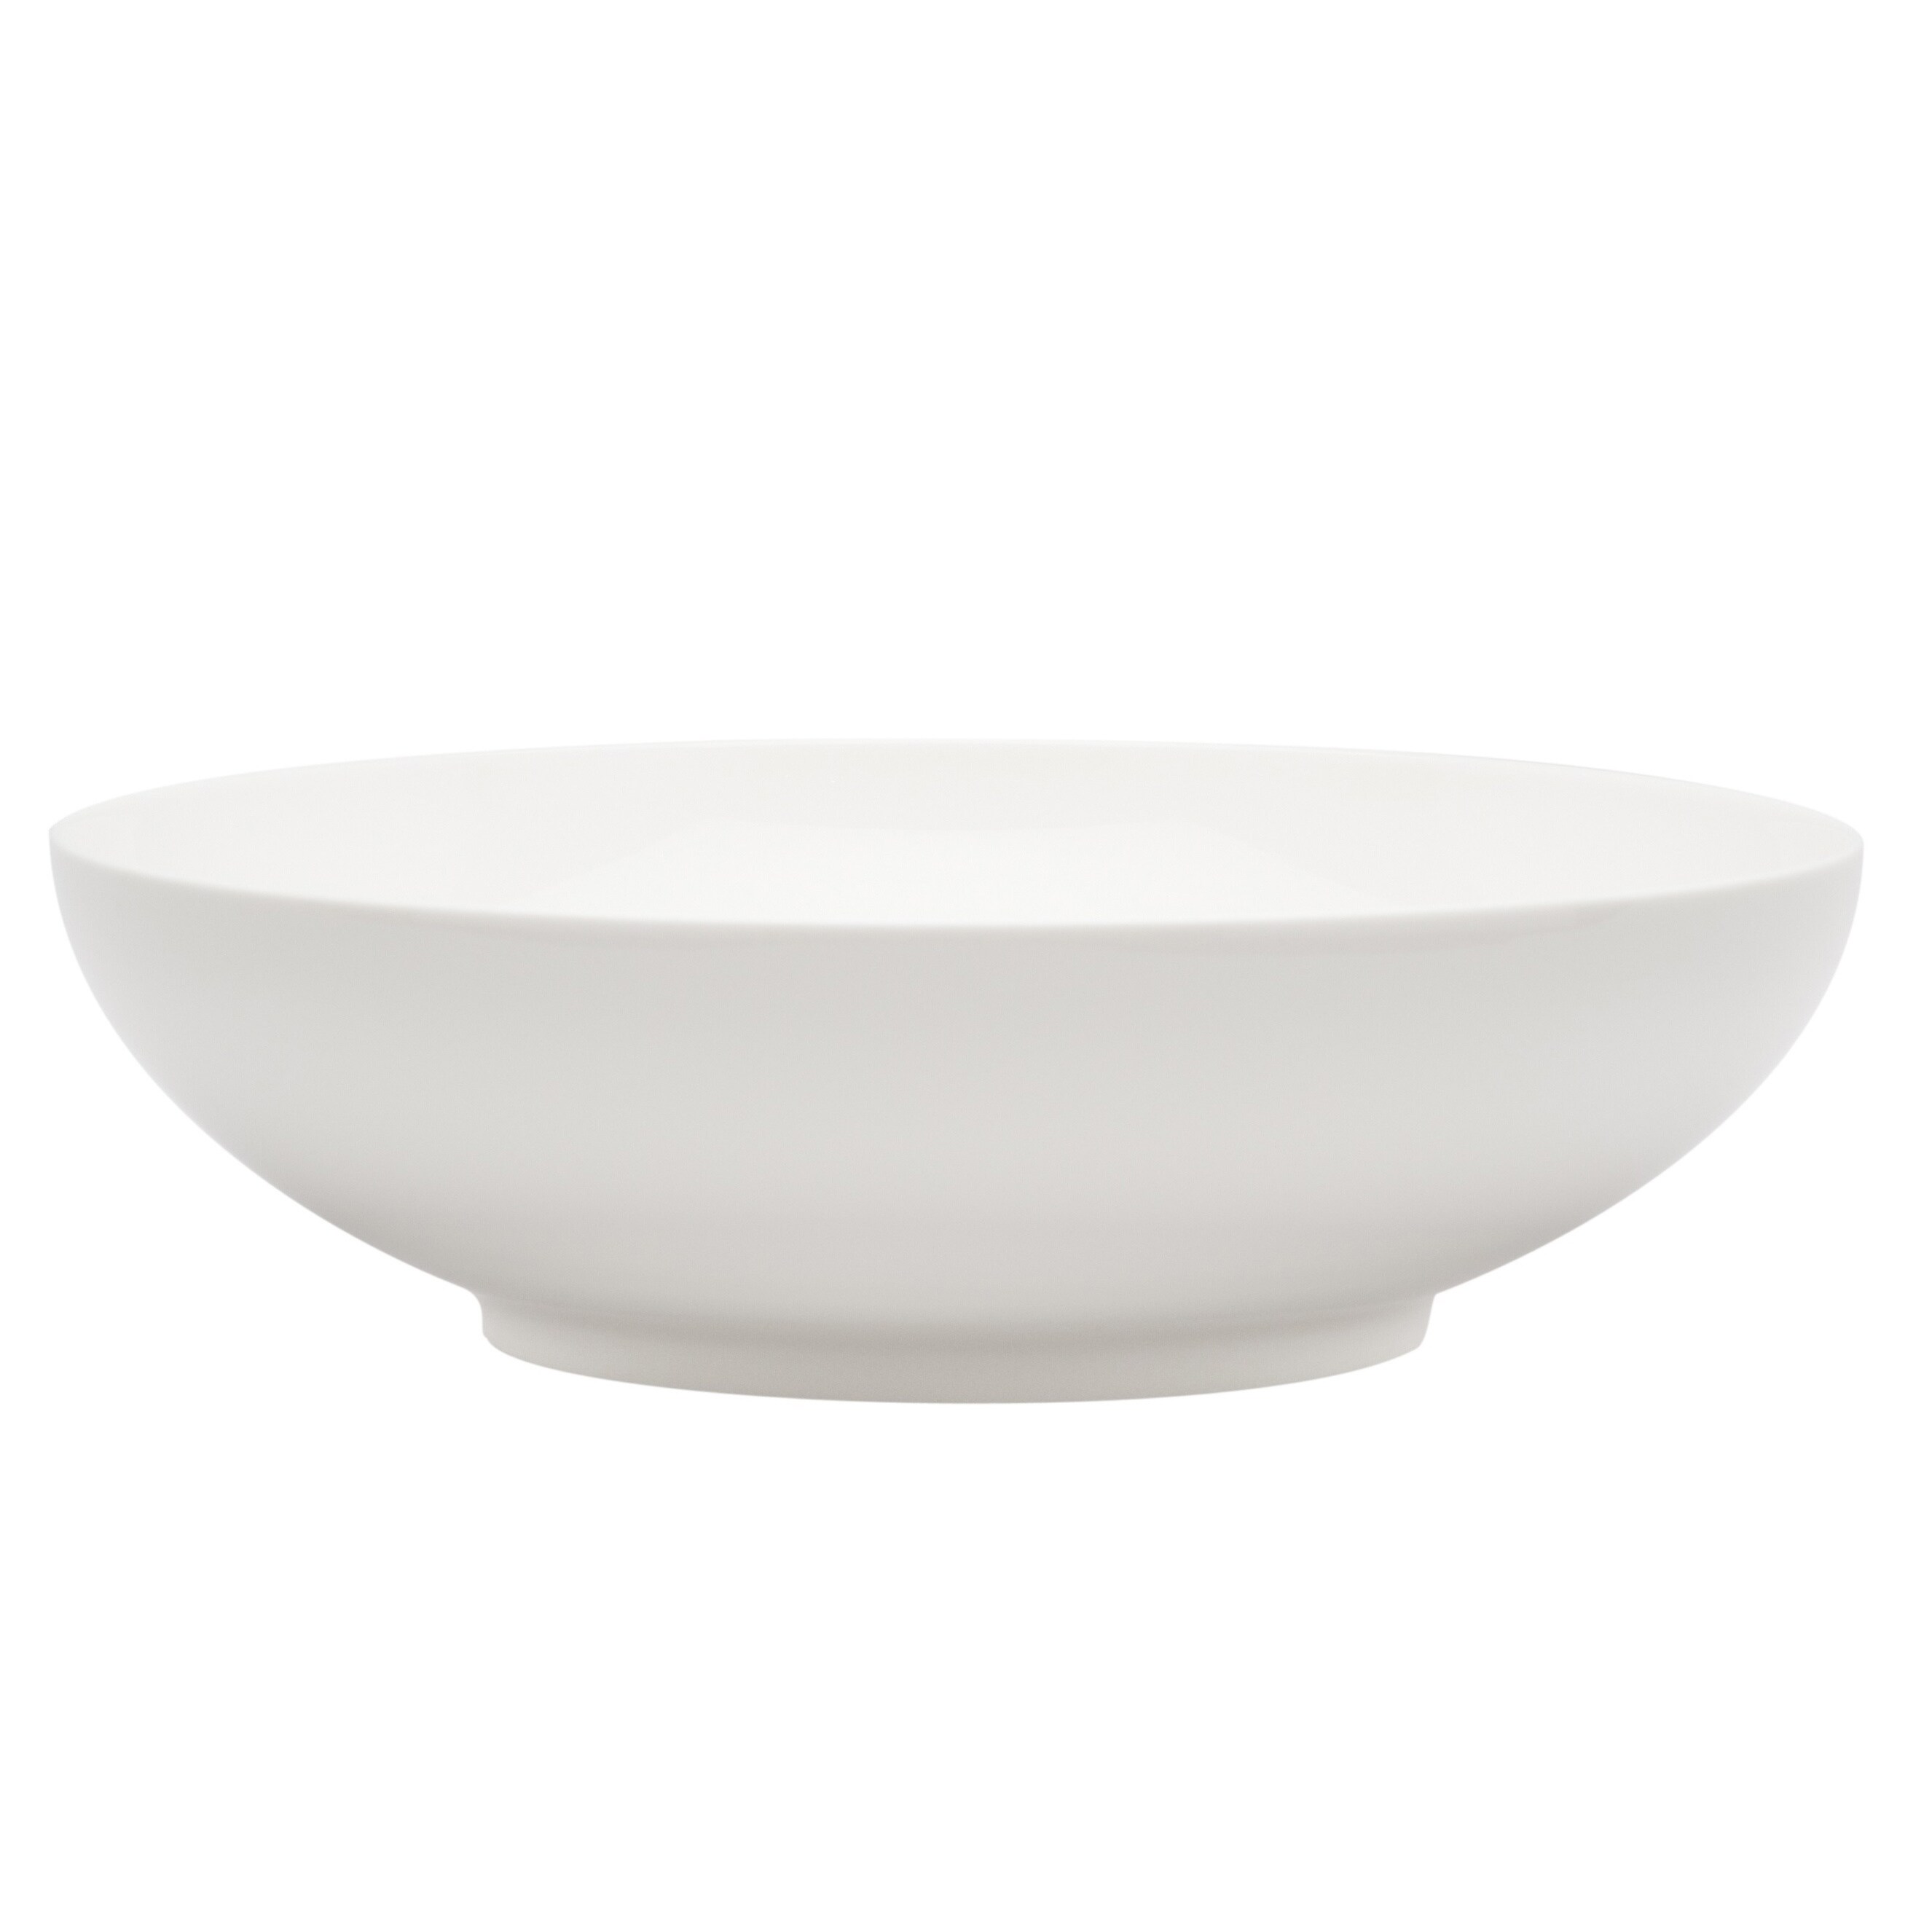 https://ak1.ostkcdn.com/images/products/10398182/Every-Time-White-Cereal-Bowl-7.75-30-oz-Set-of-6-99d2d411-89fa-47f3-8827-da382bfb87af.jpg